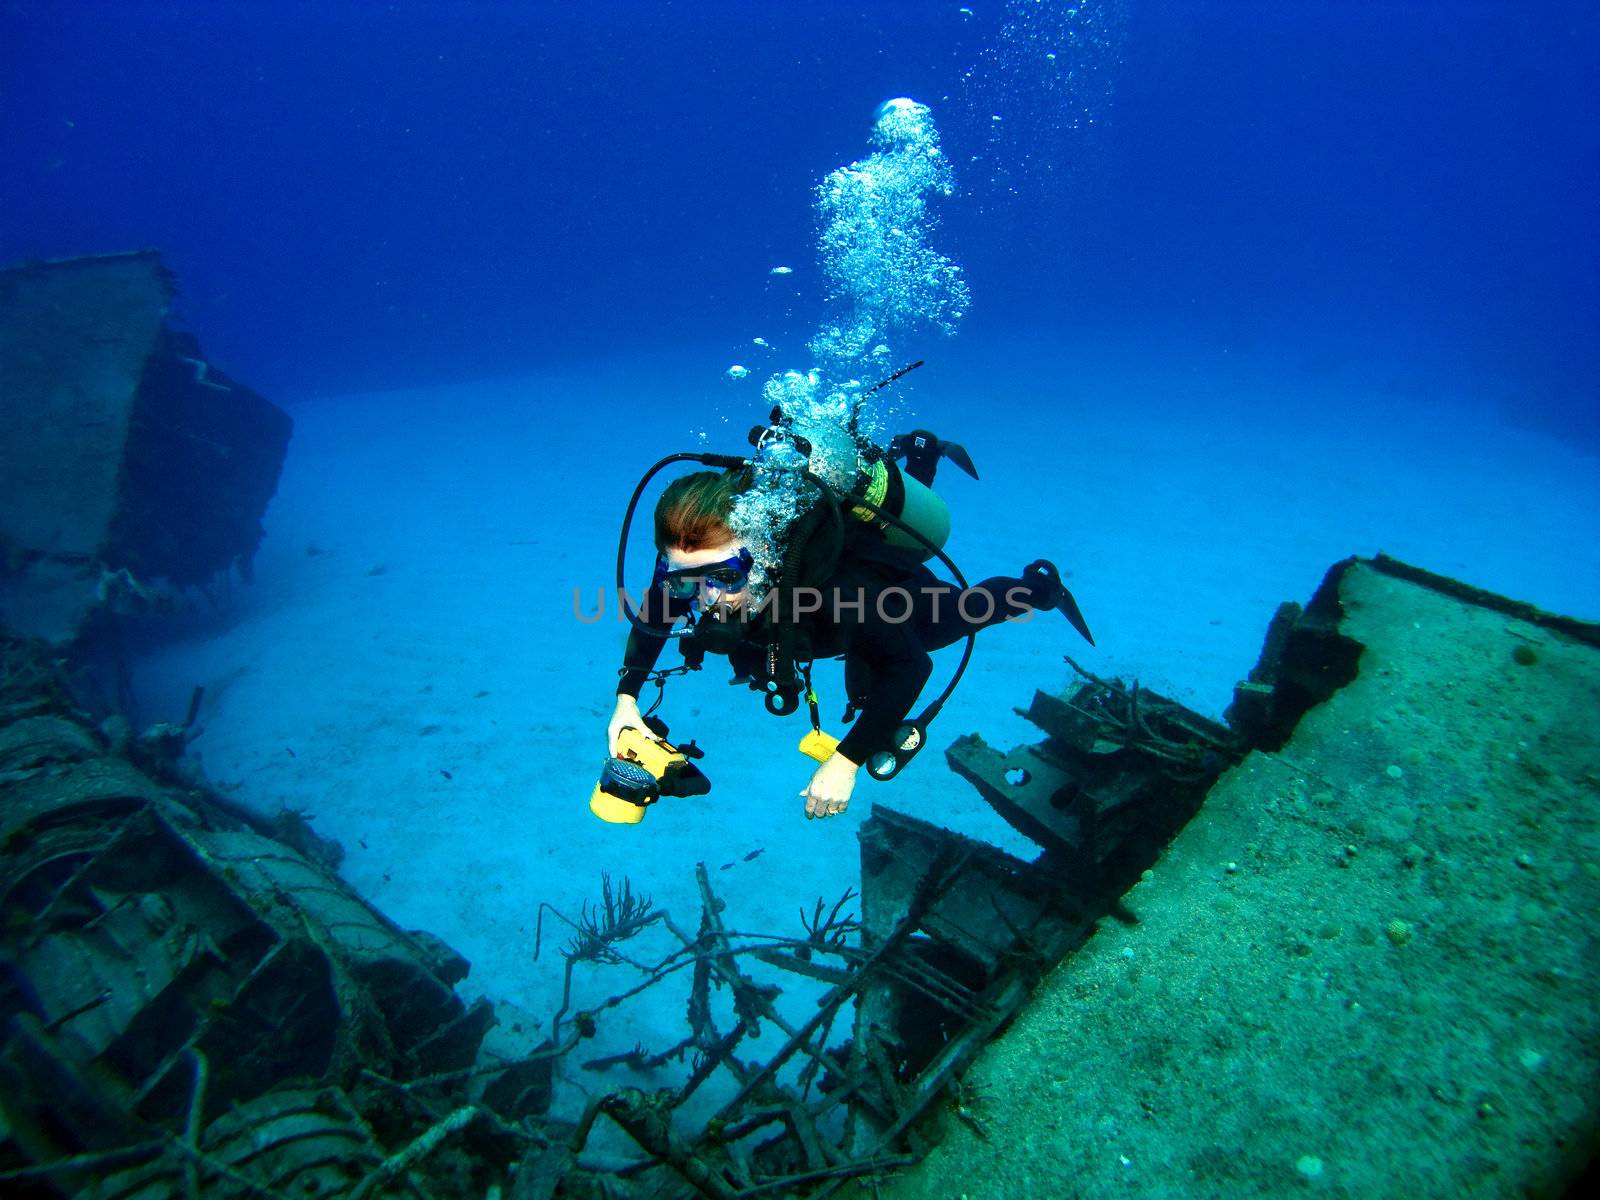 Diver photographing a Sunken Shipwreck by KevinPanizza